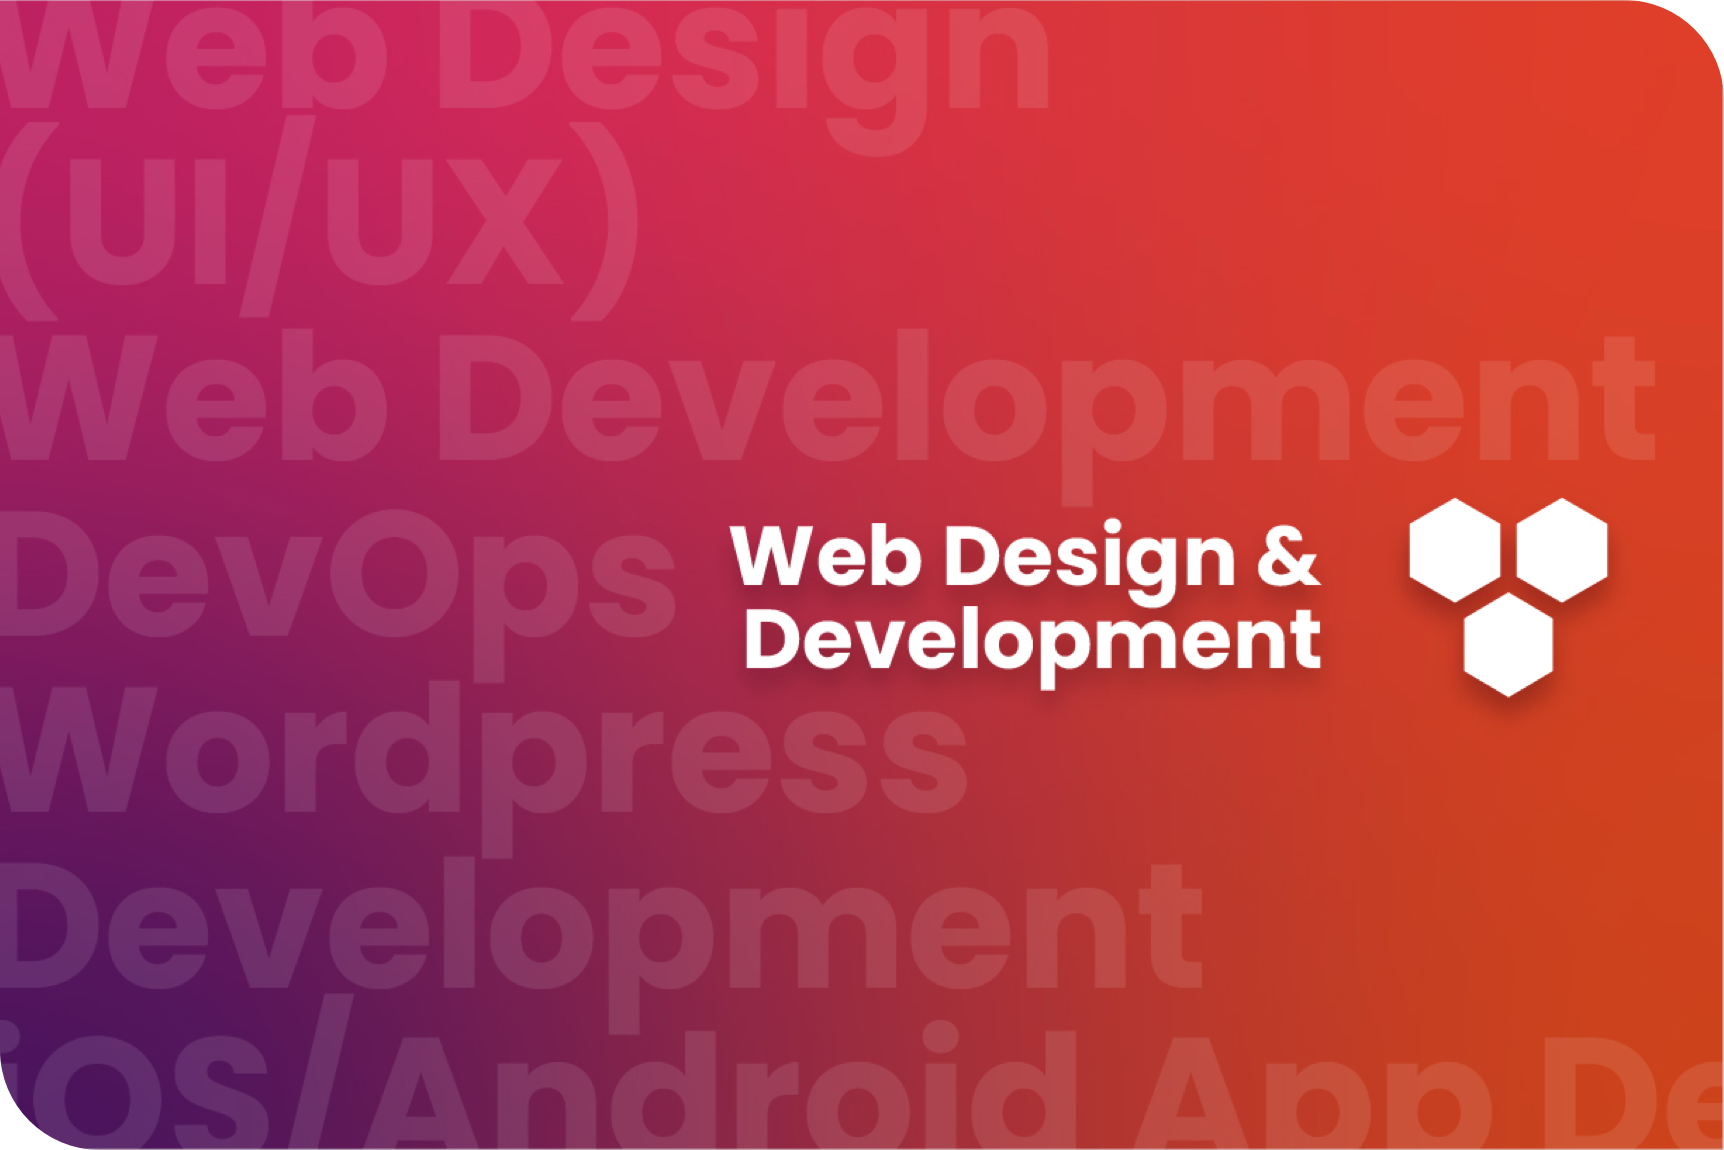 A robust, integrated approach to Web Design & Development